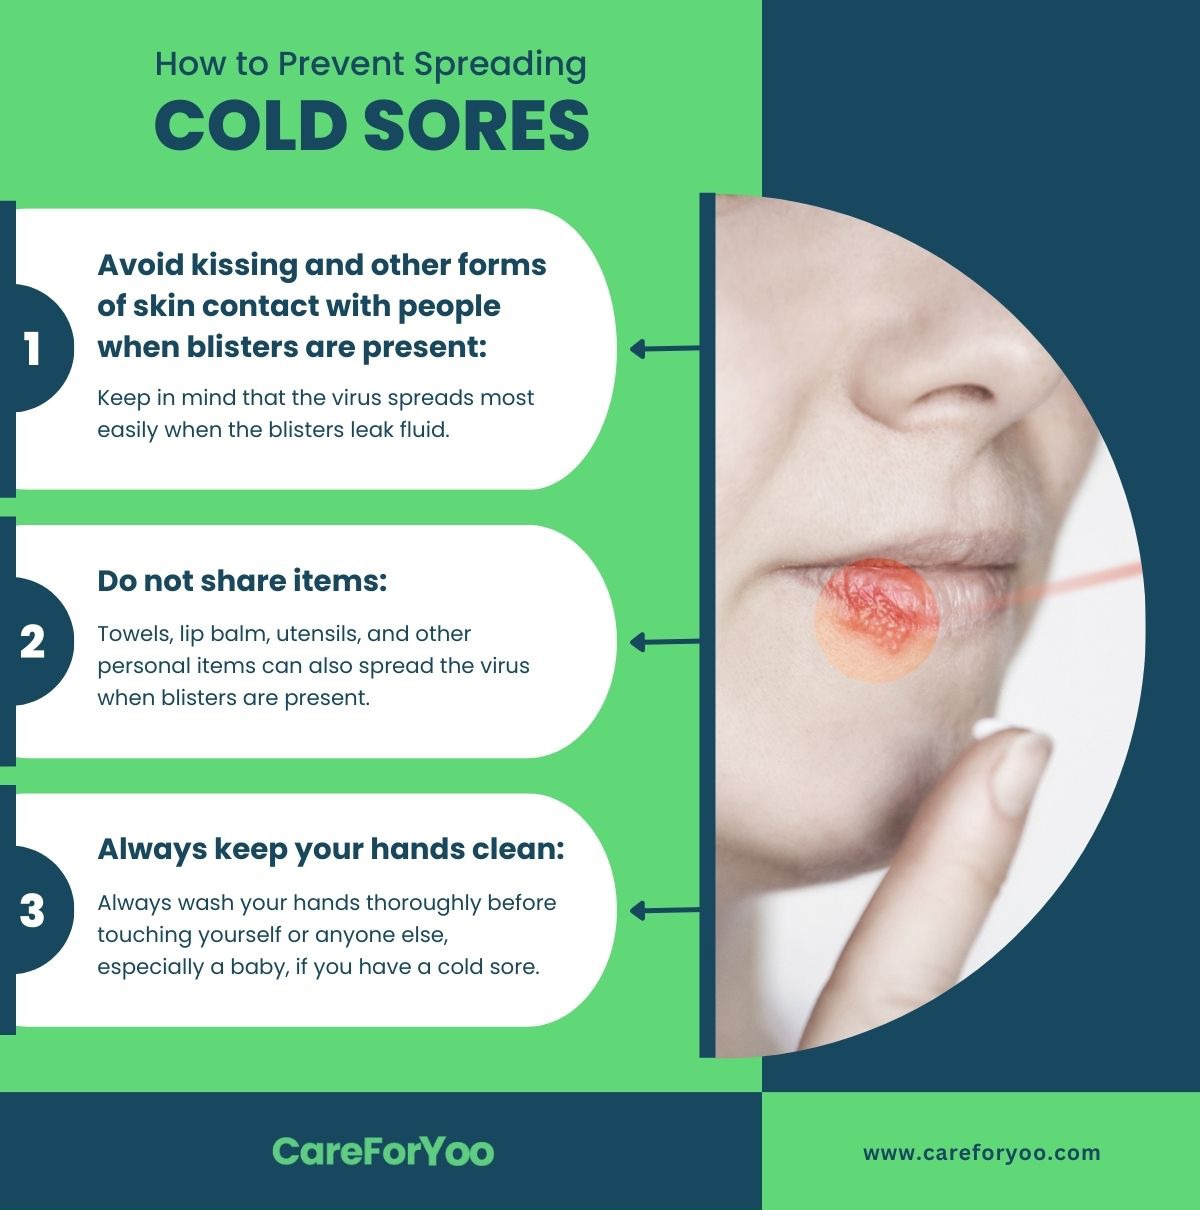 How to Prevent Spreading Cold Sores